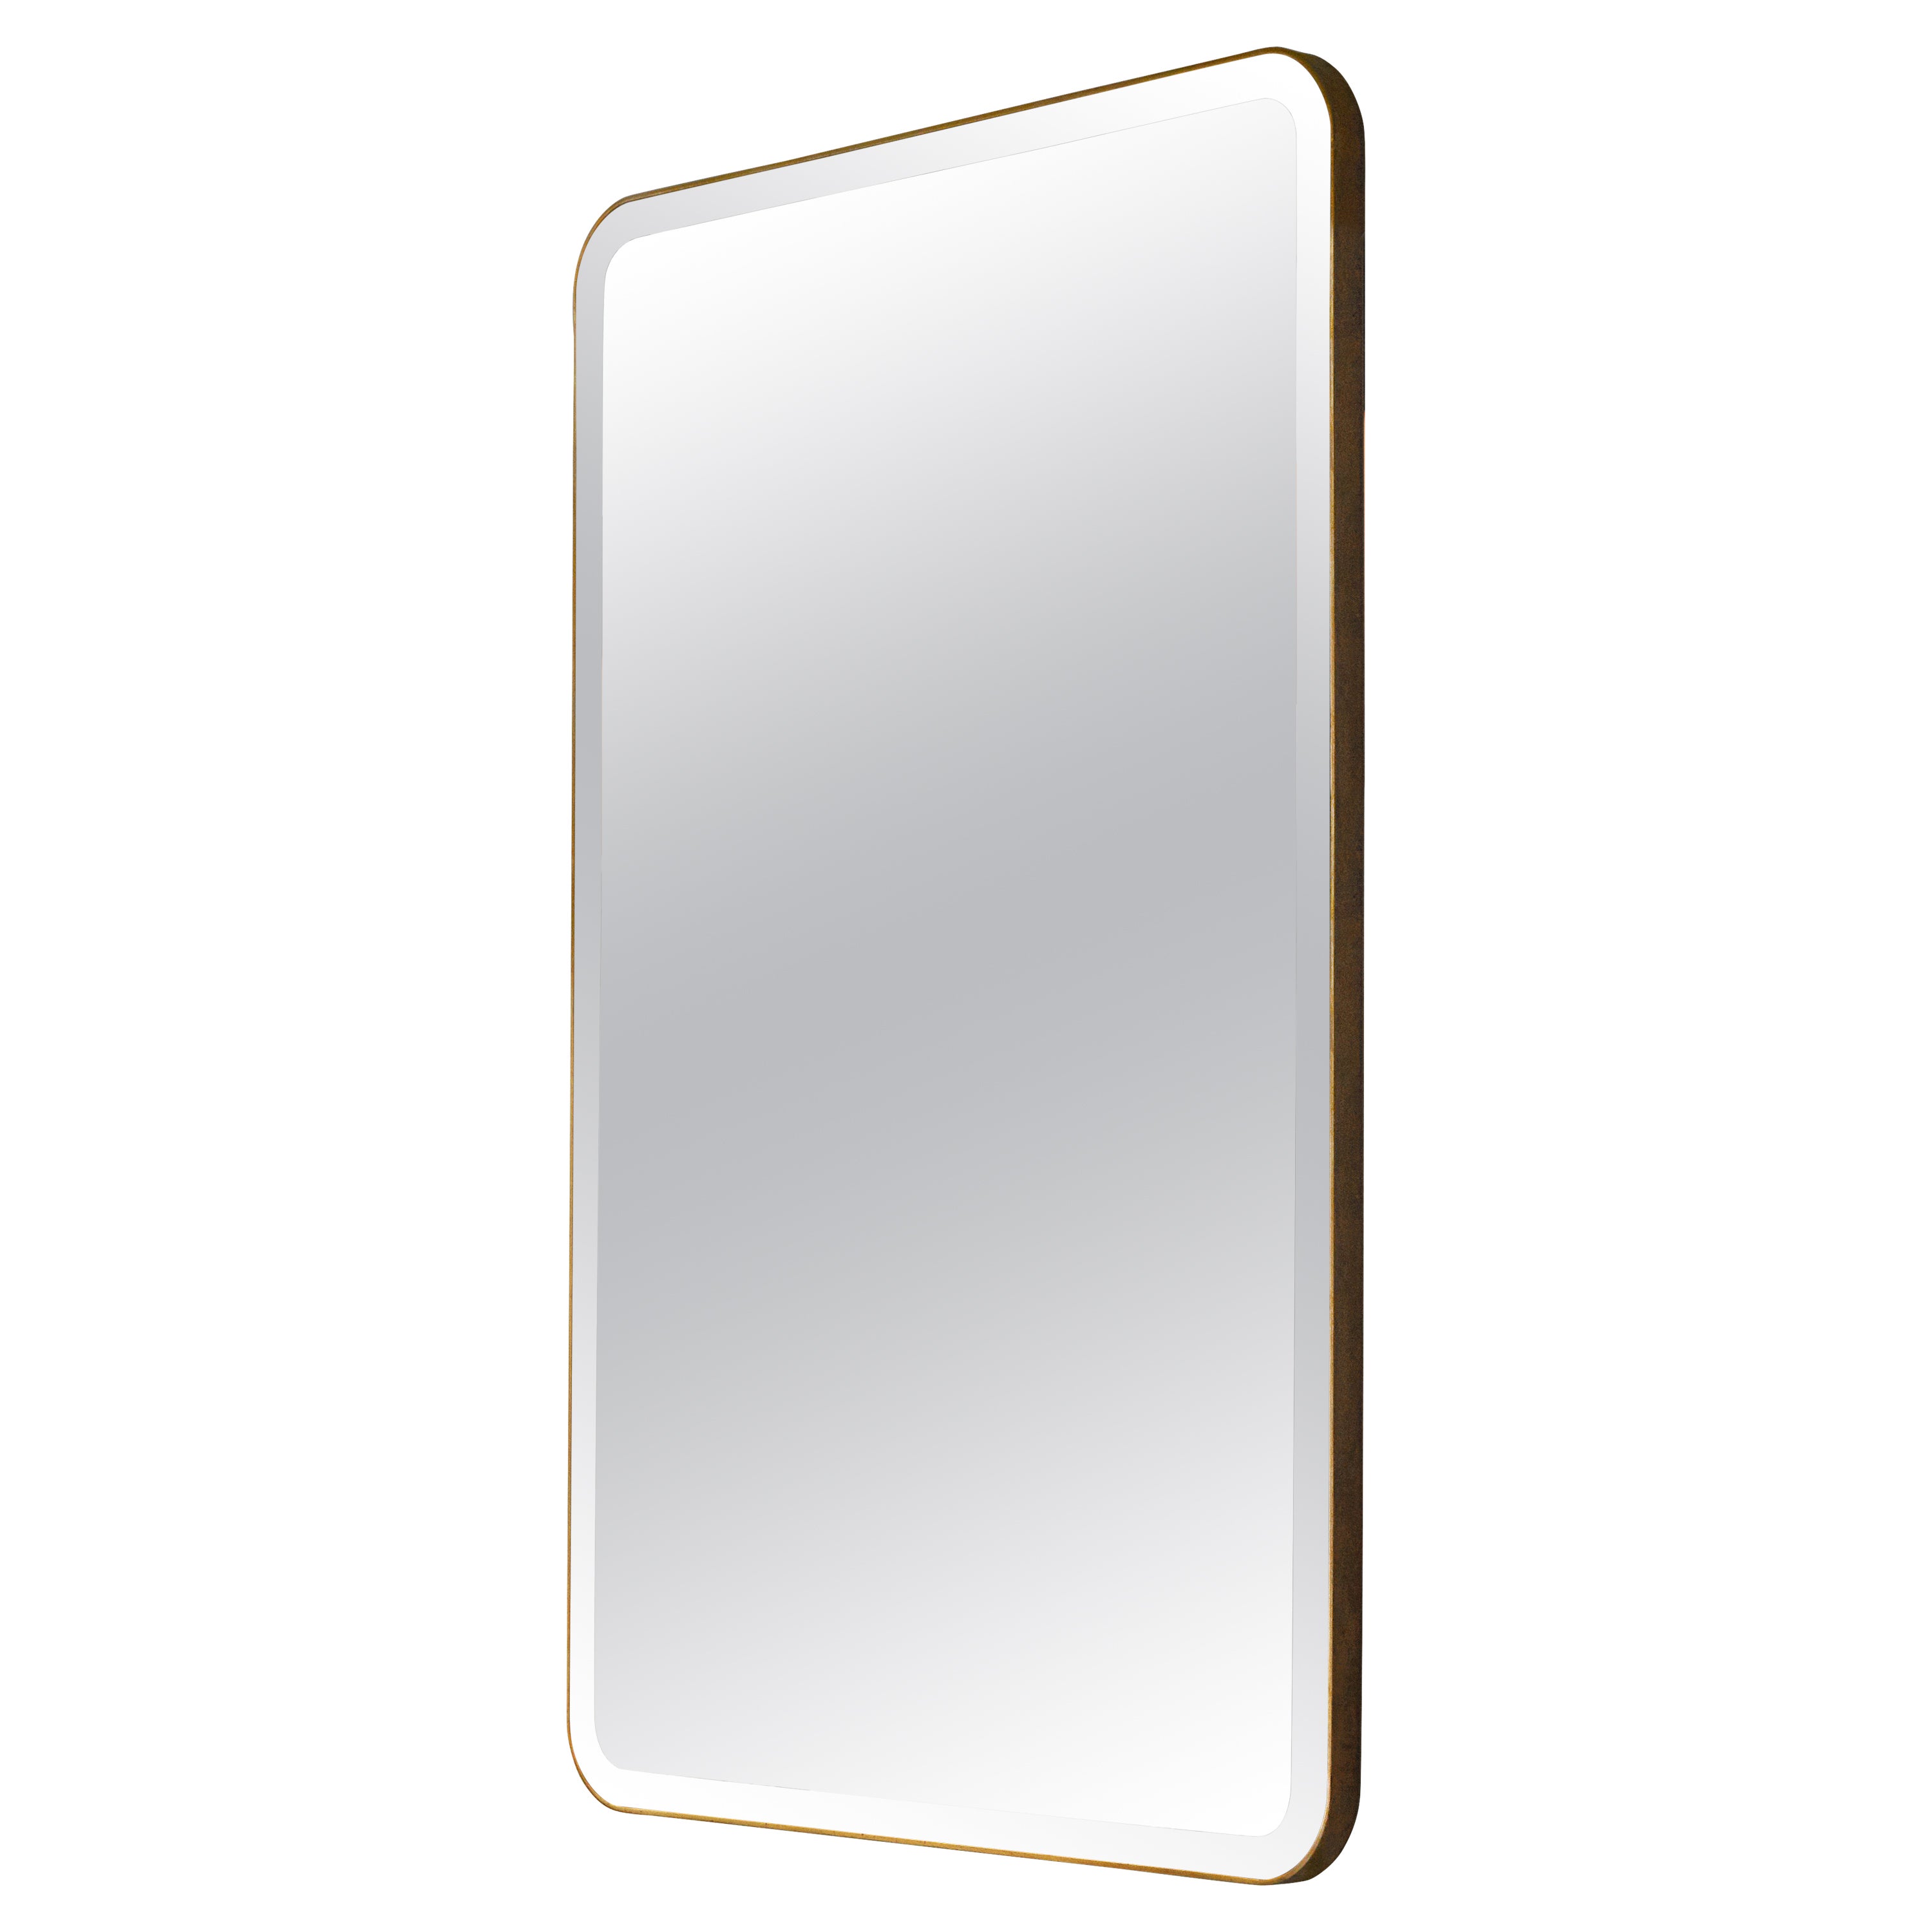 Sofie Mirror in Bevelled Glass and Brass — Large For Sale